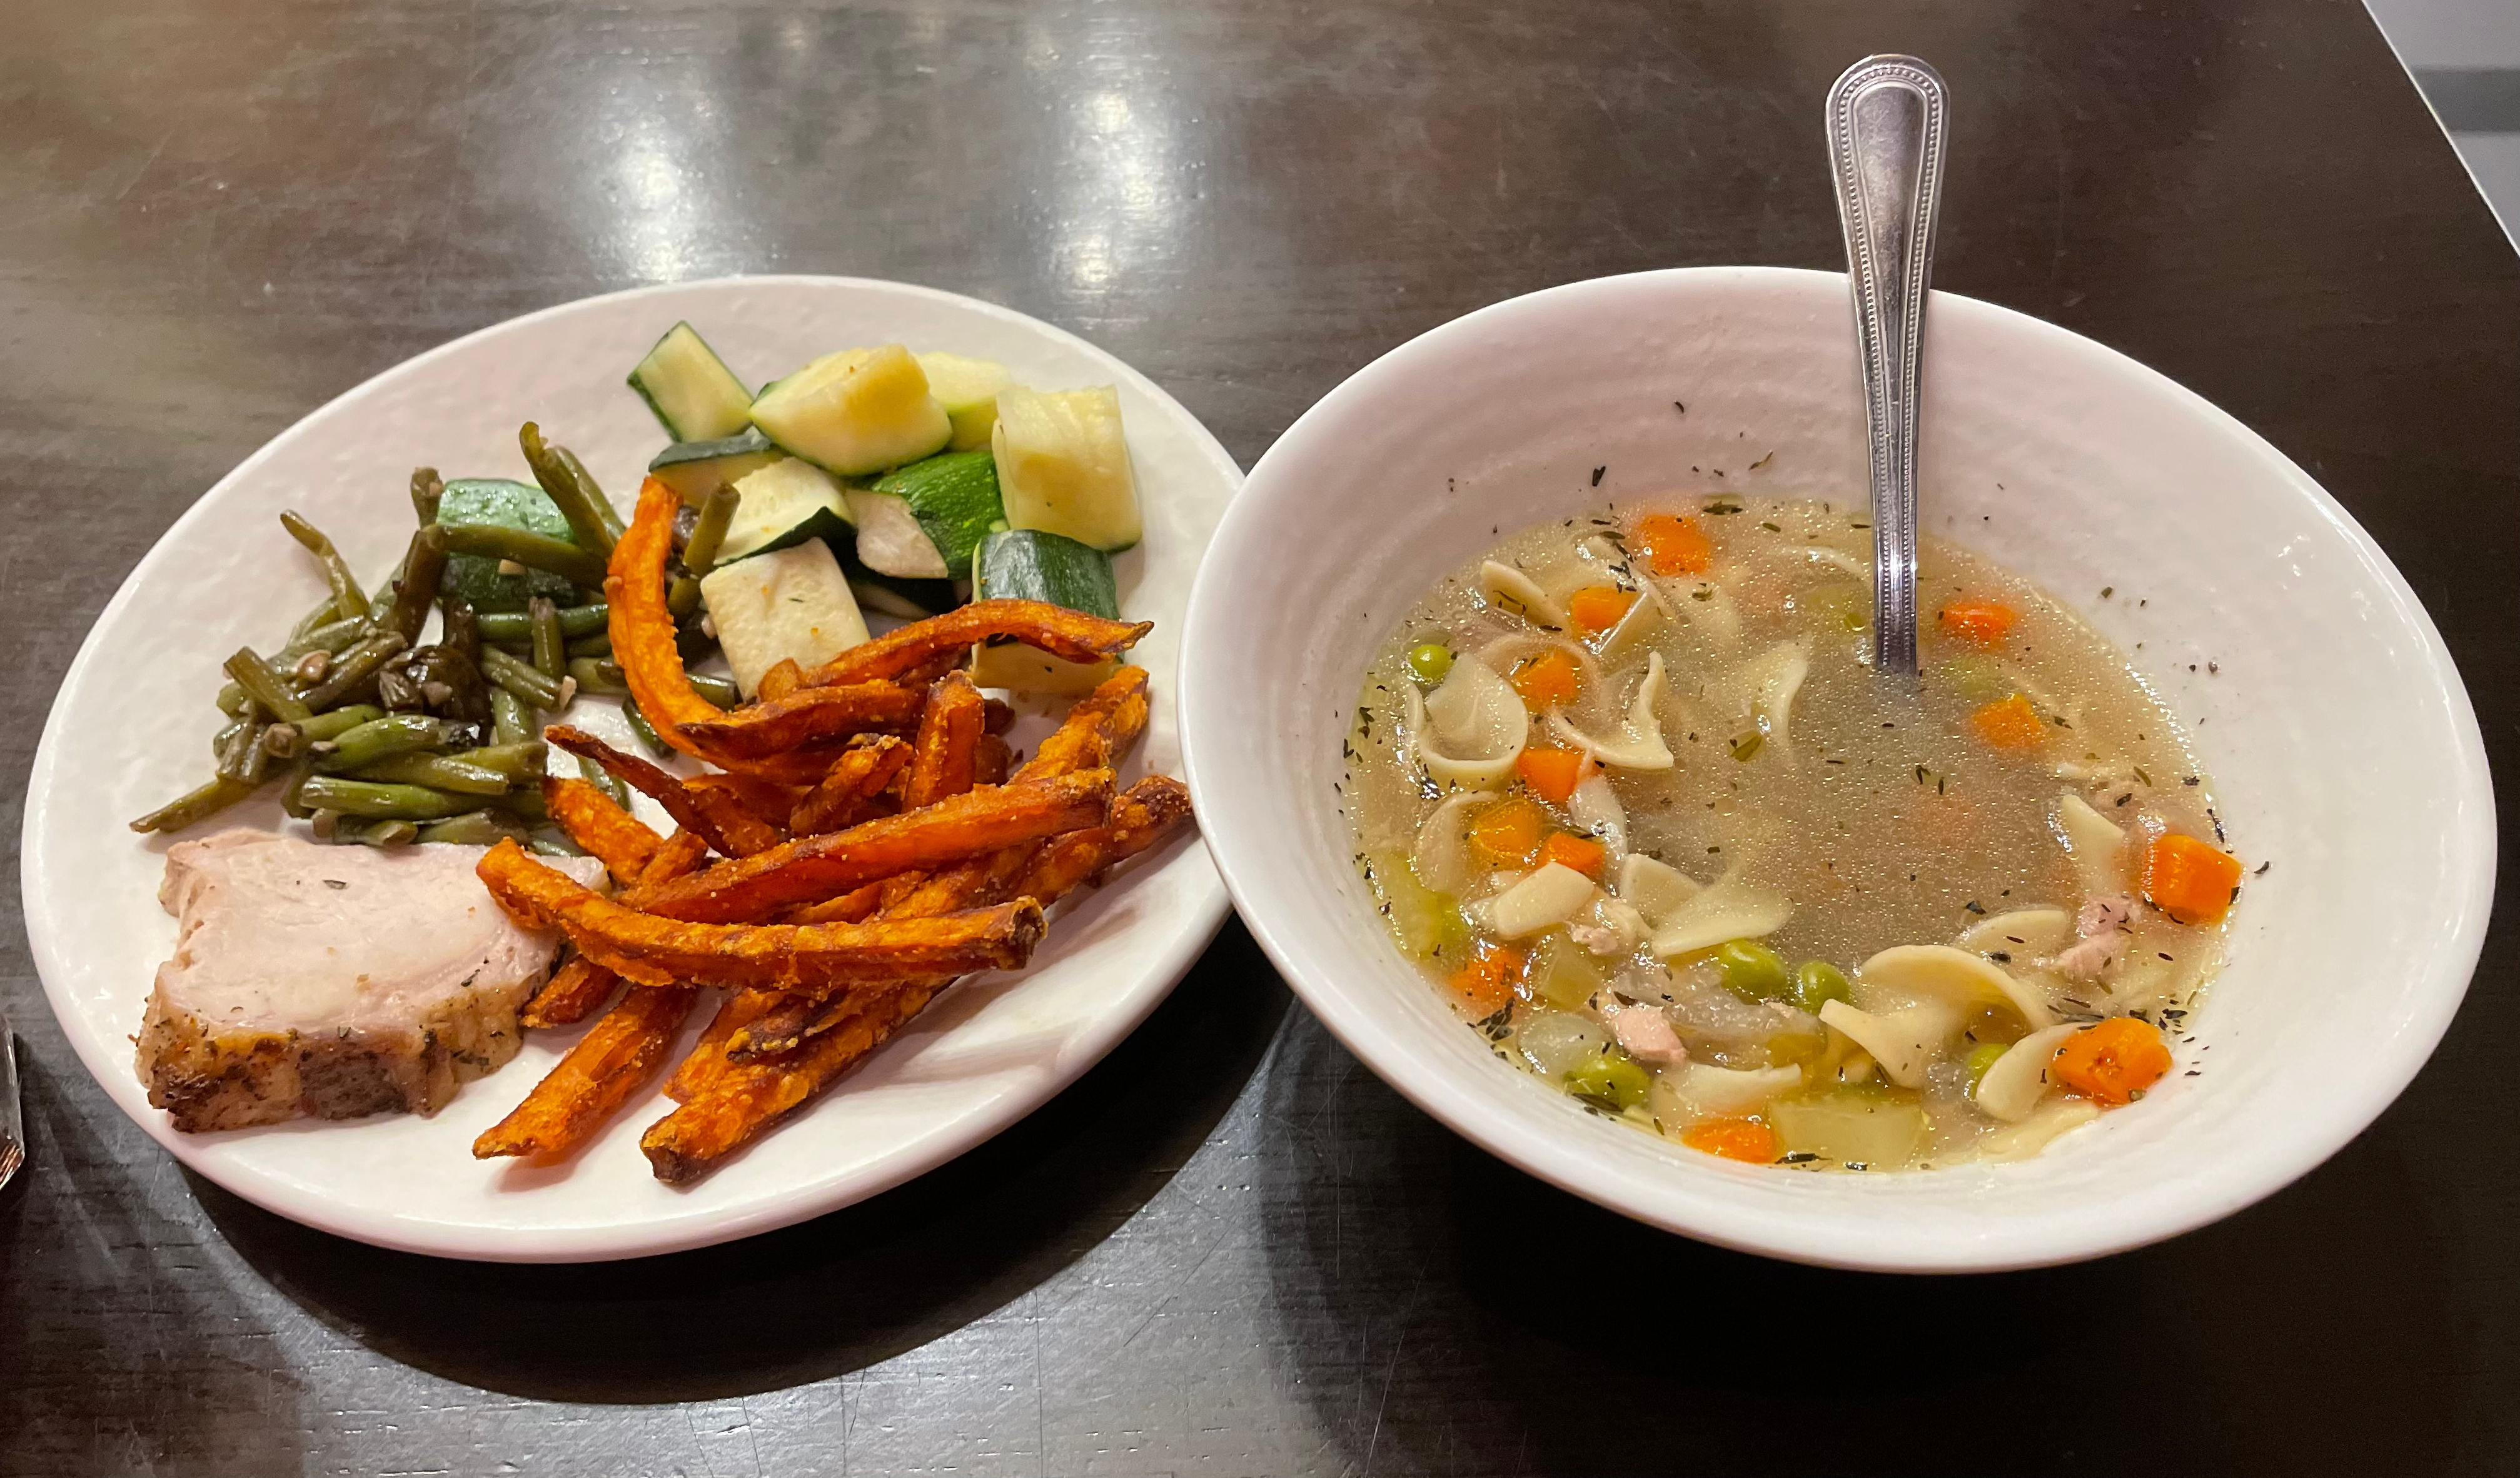 Pork, green beans, zucchini, sweet potato fries, and chicken noodle soup